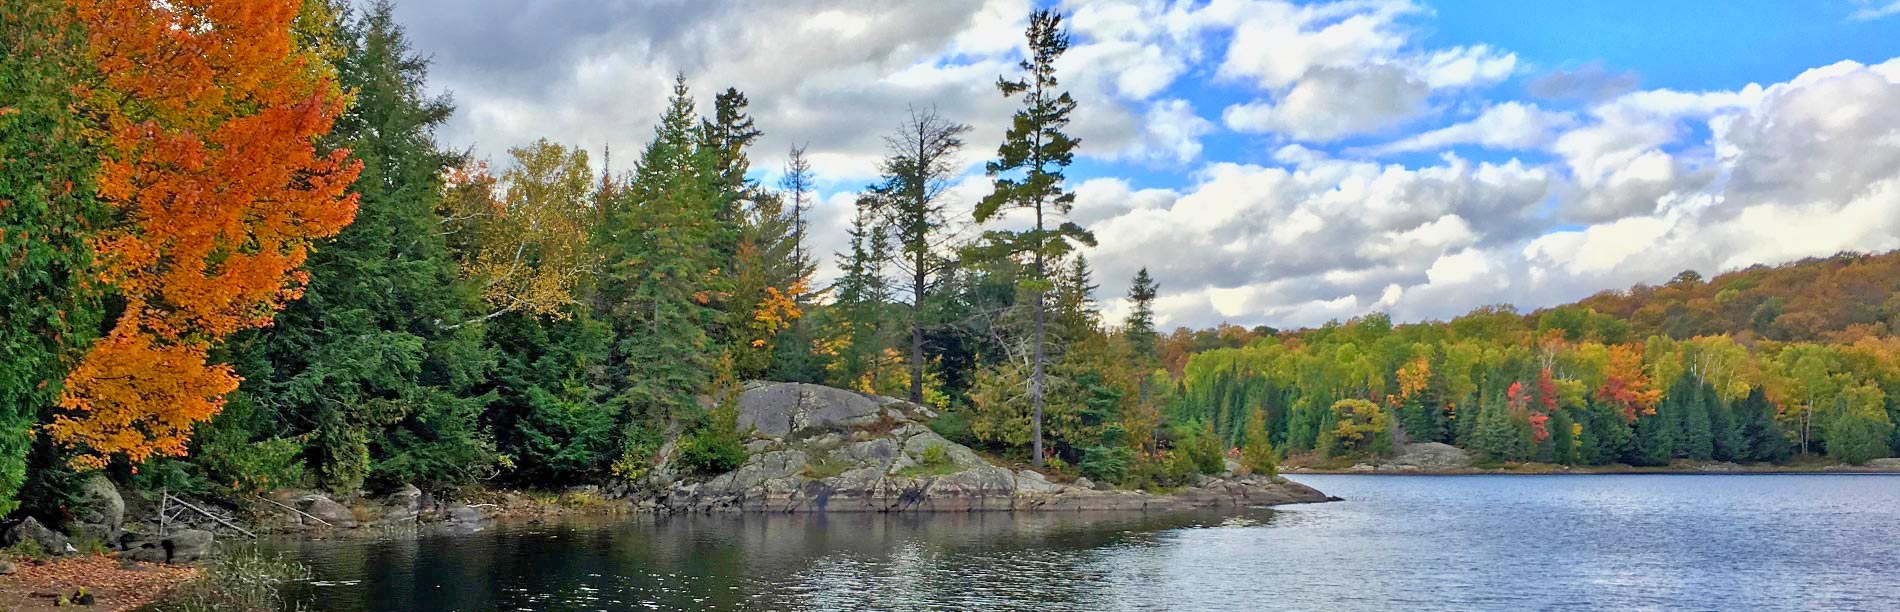 Autumn leaves on trees surrounding a lake with rock outcroppings.